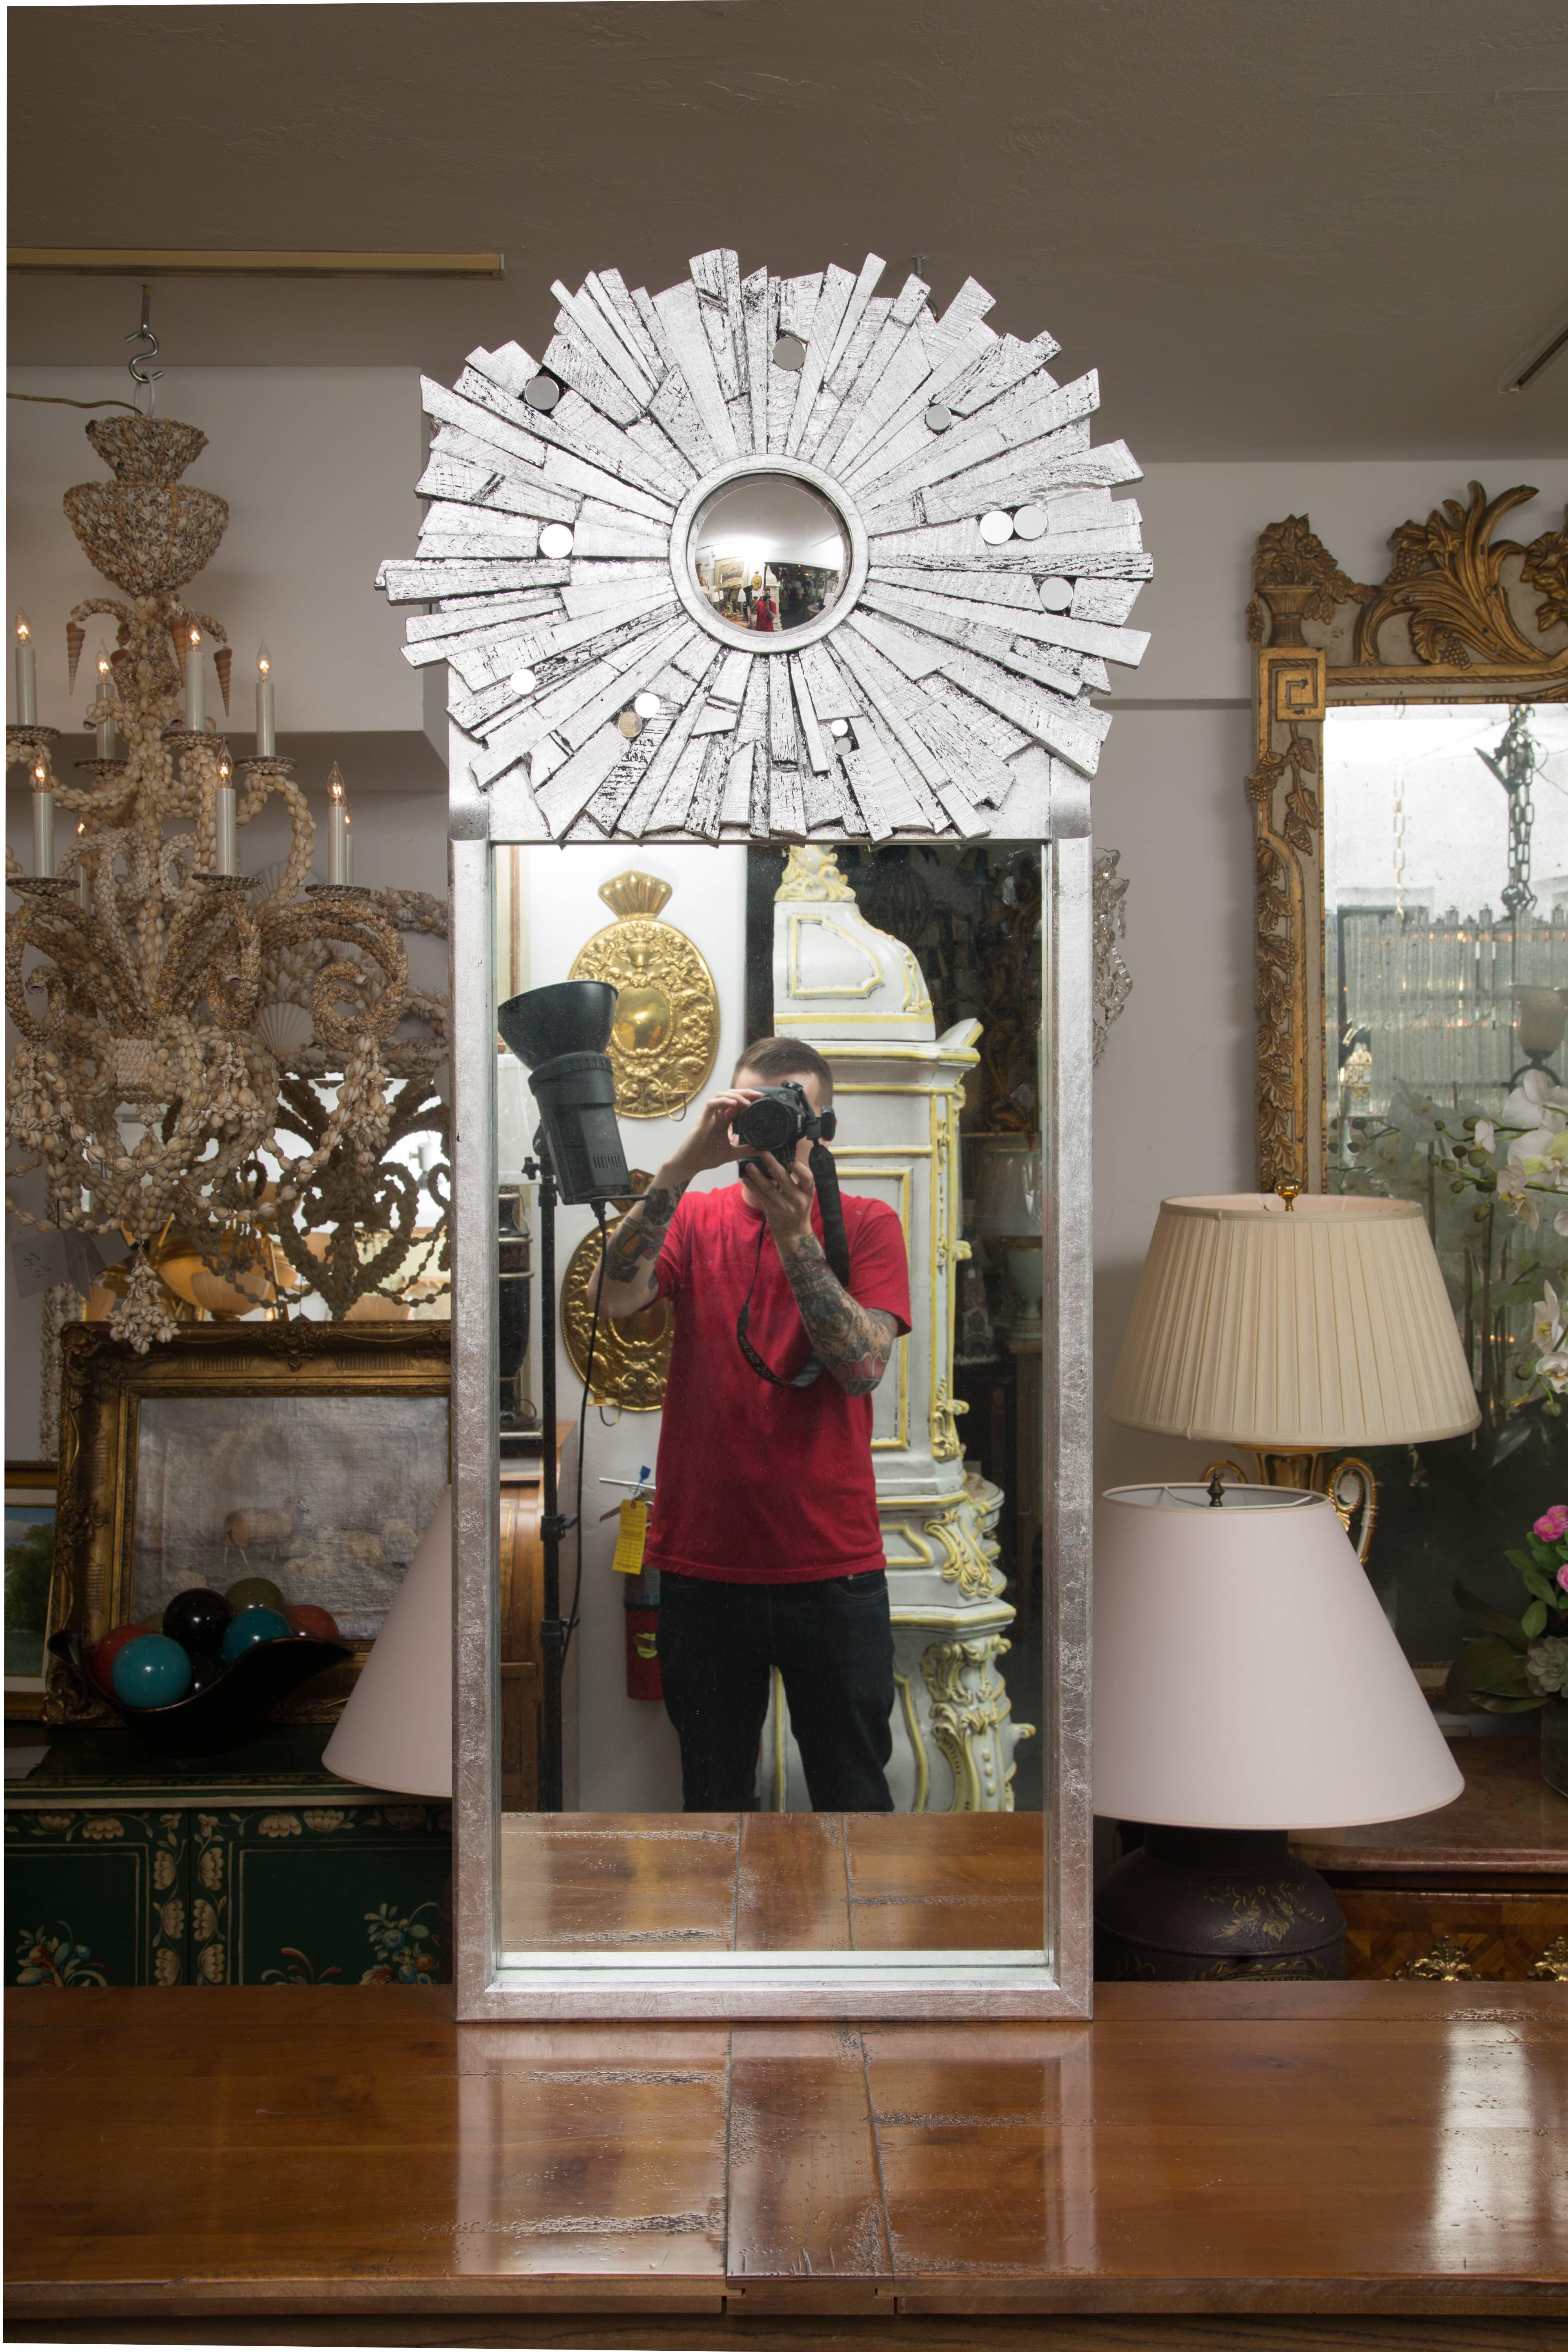 These unique silver-painted contemporary mirrors have a sunburst top section with rough hewn spokes radiating from a central convex mirror over a rectangular mirrored bottom section. Considered 